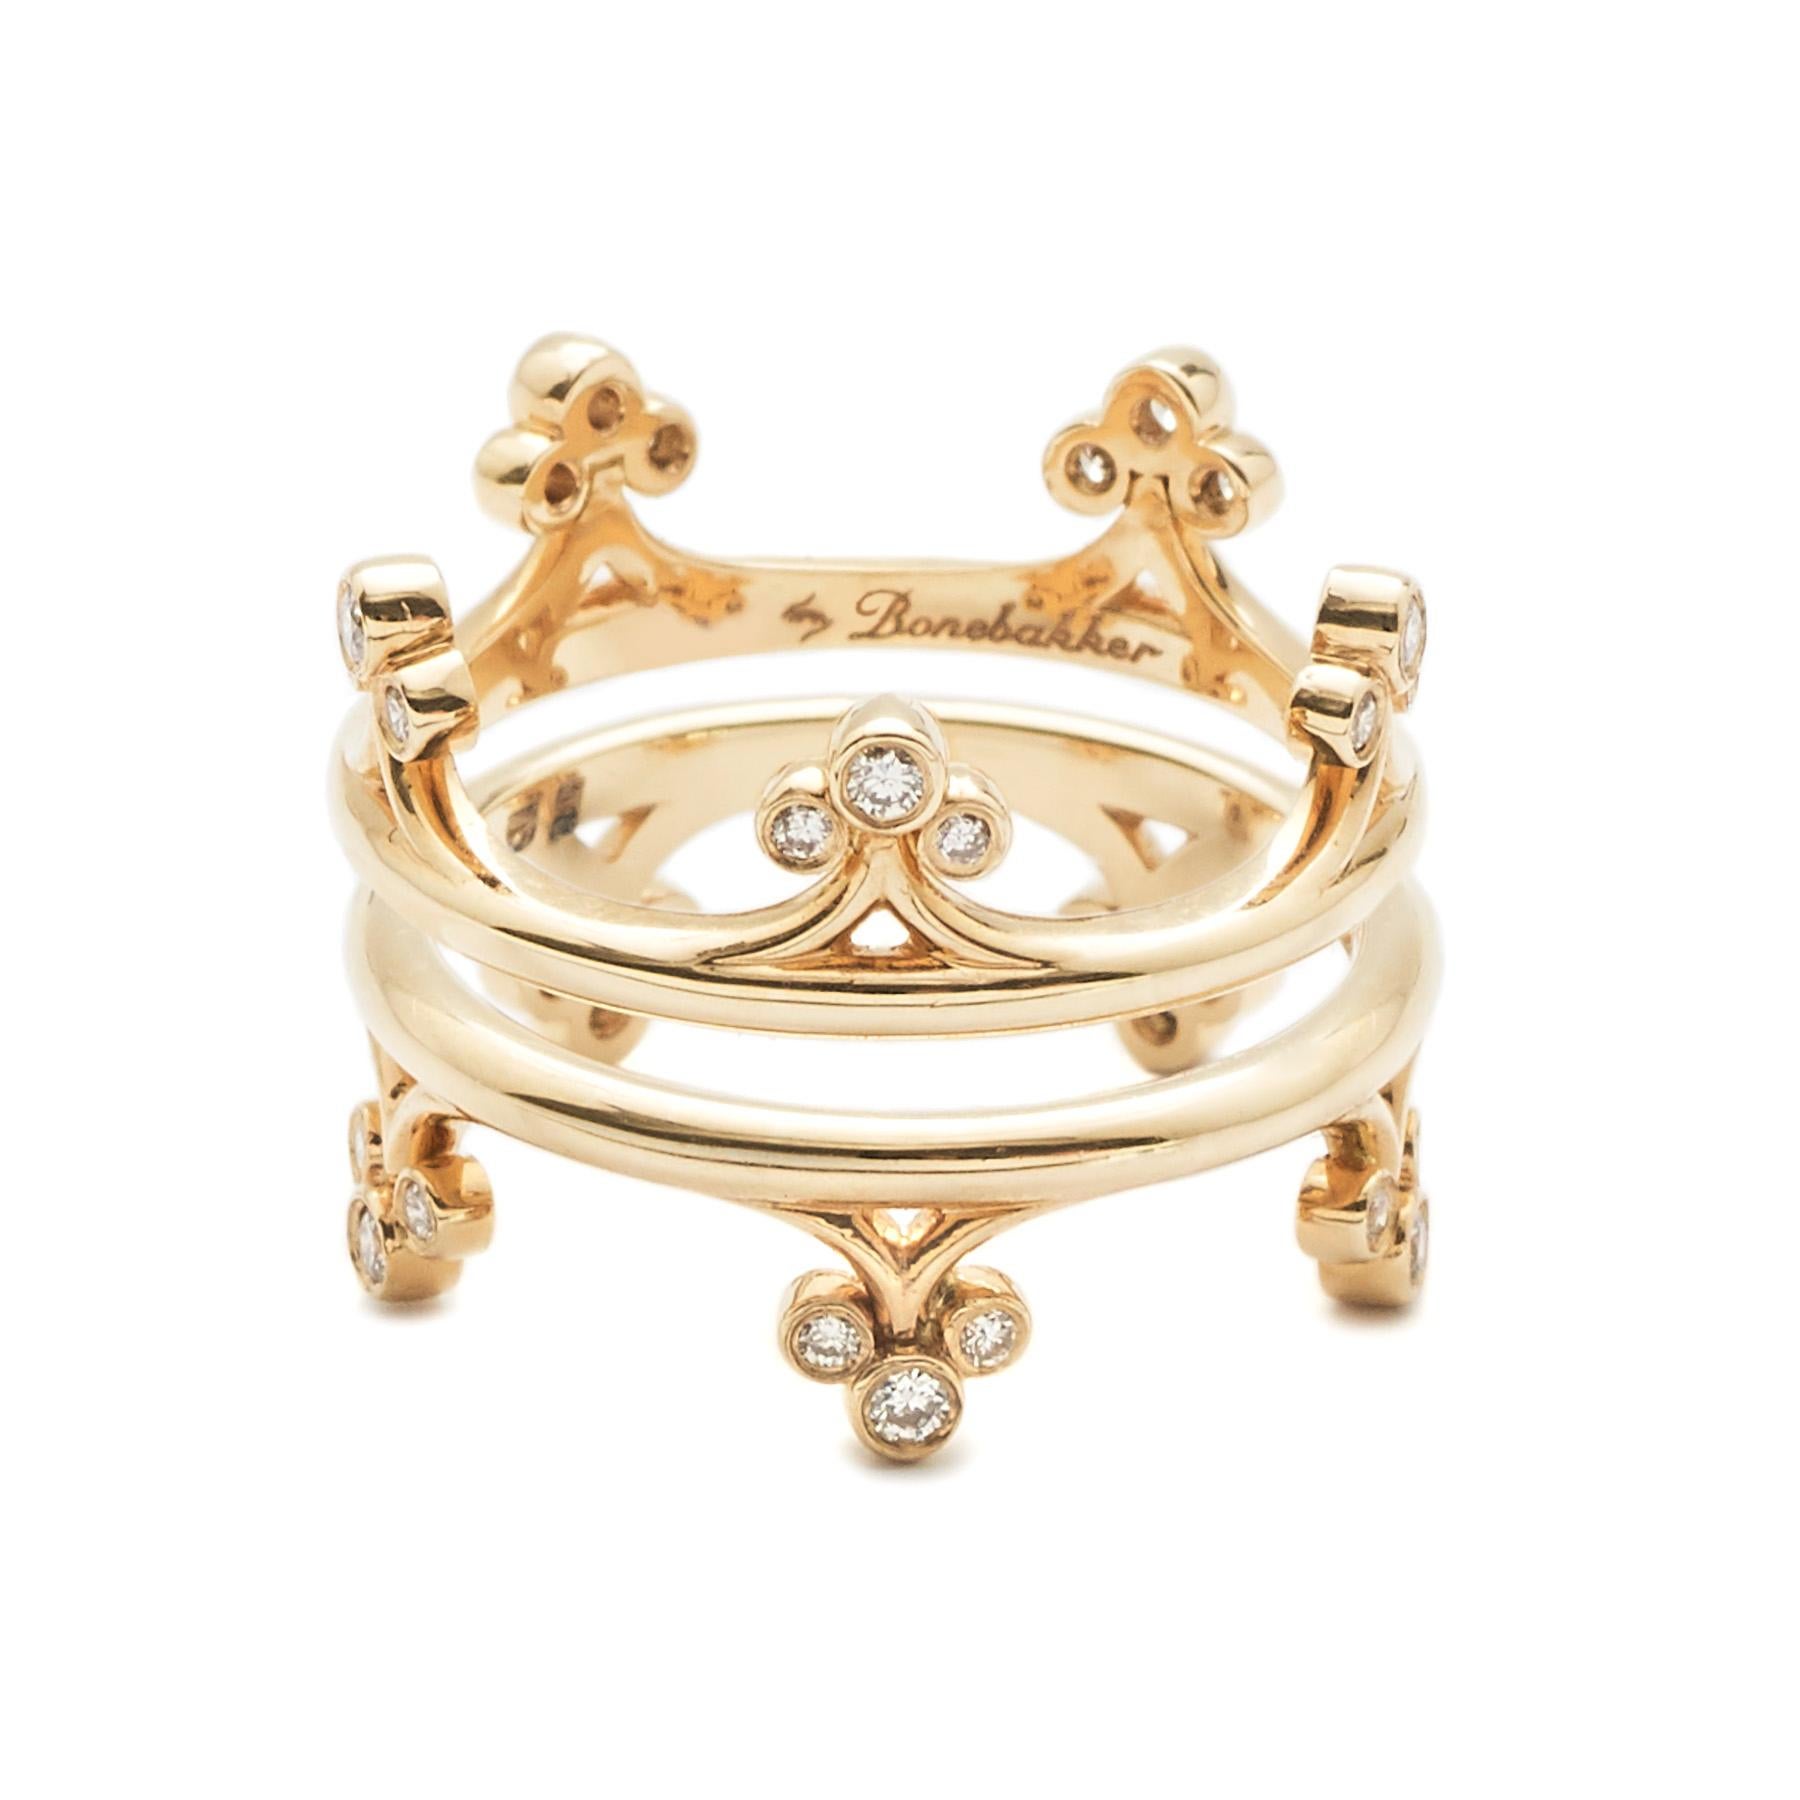 Set of 18 karat yellow gold rings set with  0.30 carat of diamonds per ring are inspired by the Hogesluisbrug in Amsterdam crossing the famous Amstel river. It is one of the most romantic bridges in Amsterdam and beautifully decorated with lanterns.